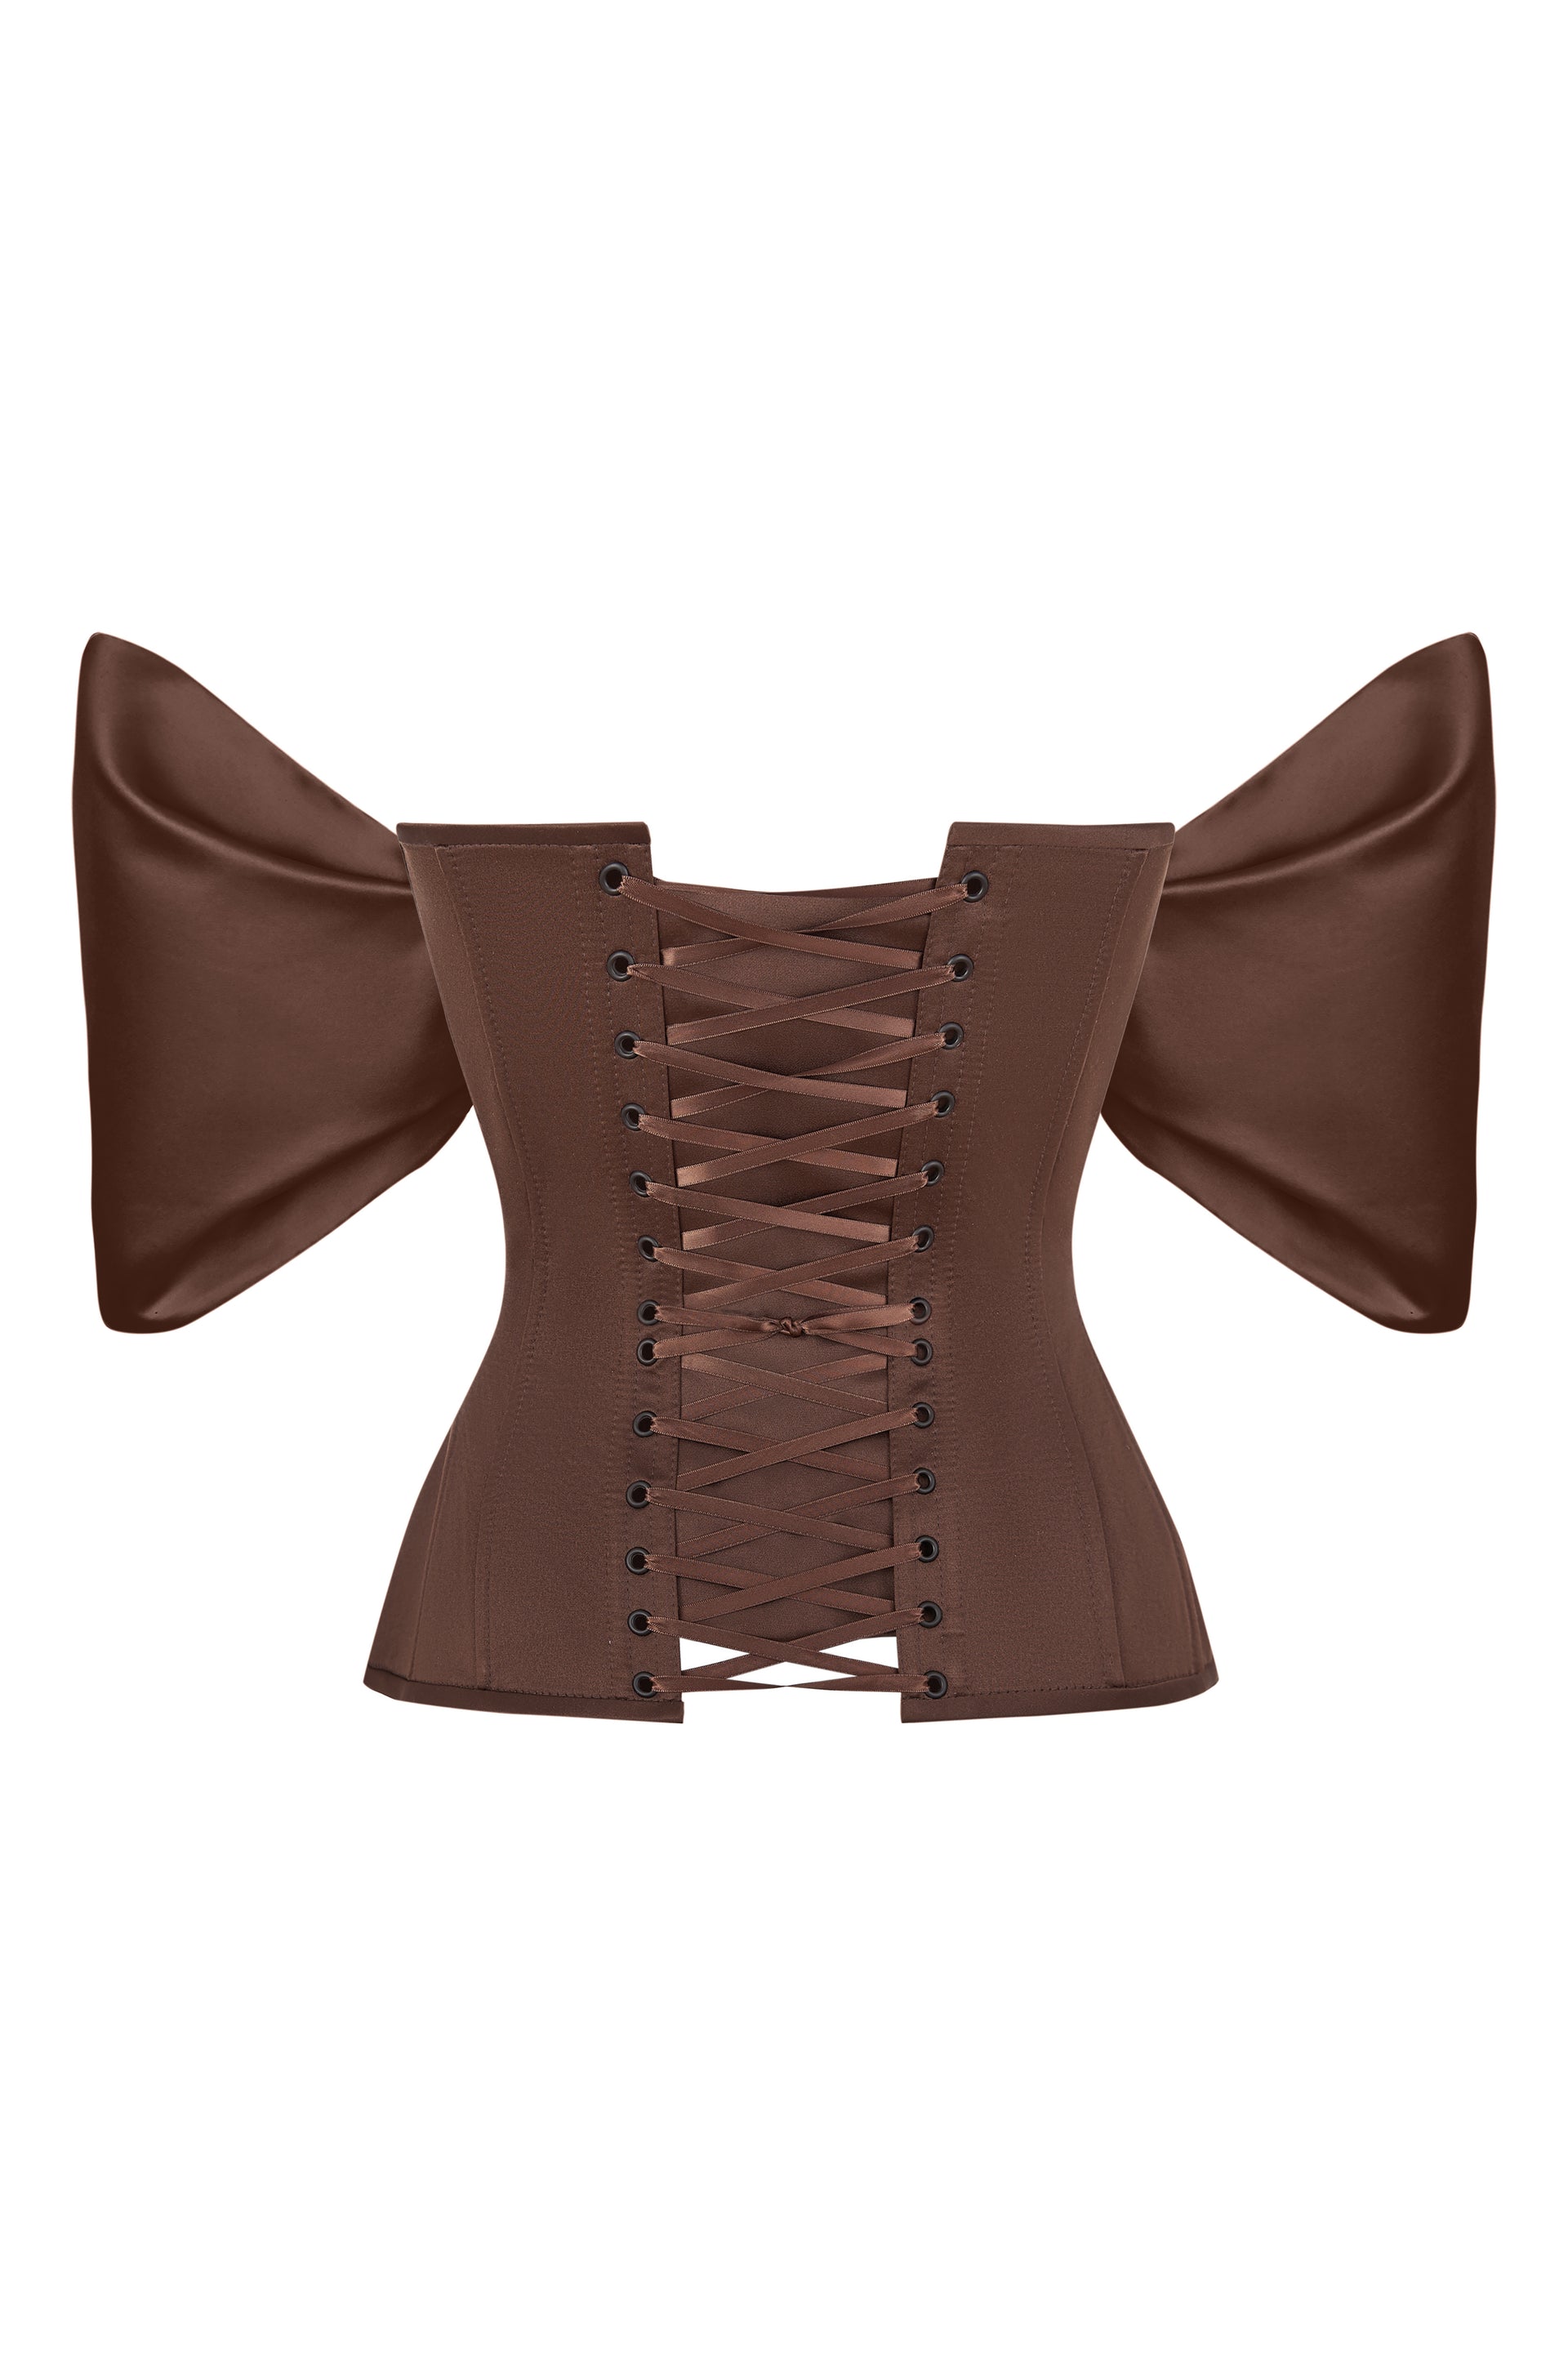 Brown corset with detachable sleeves